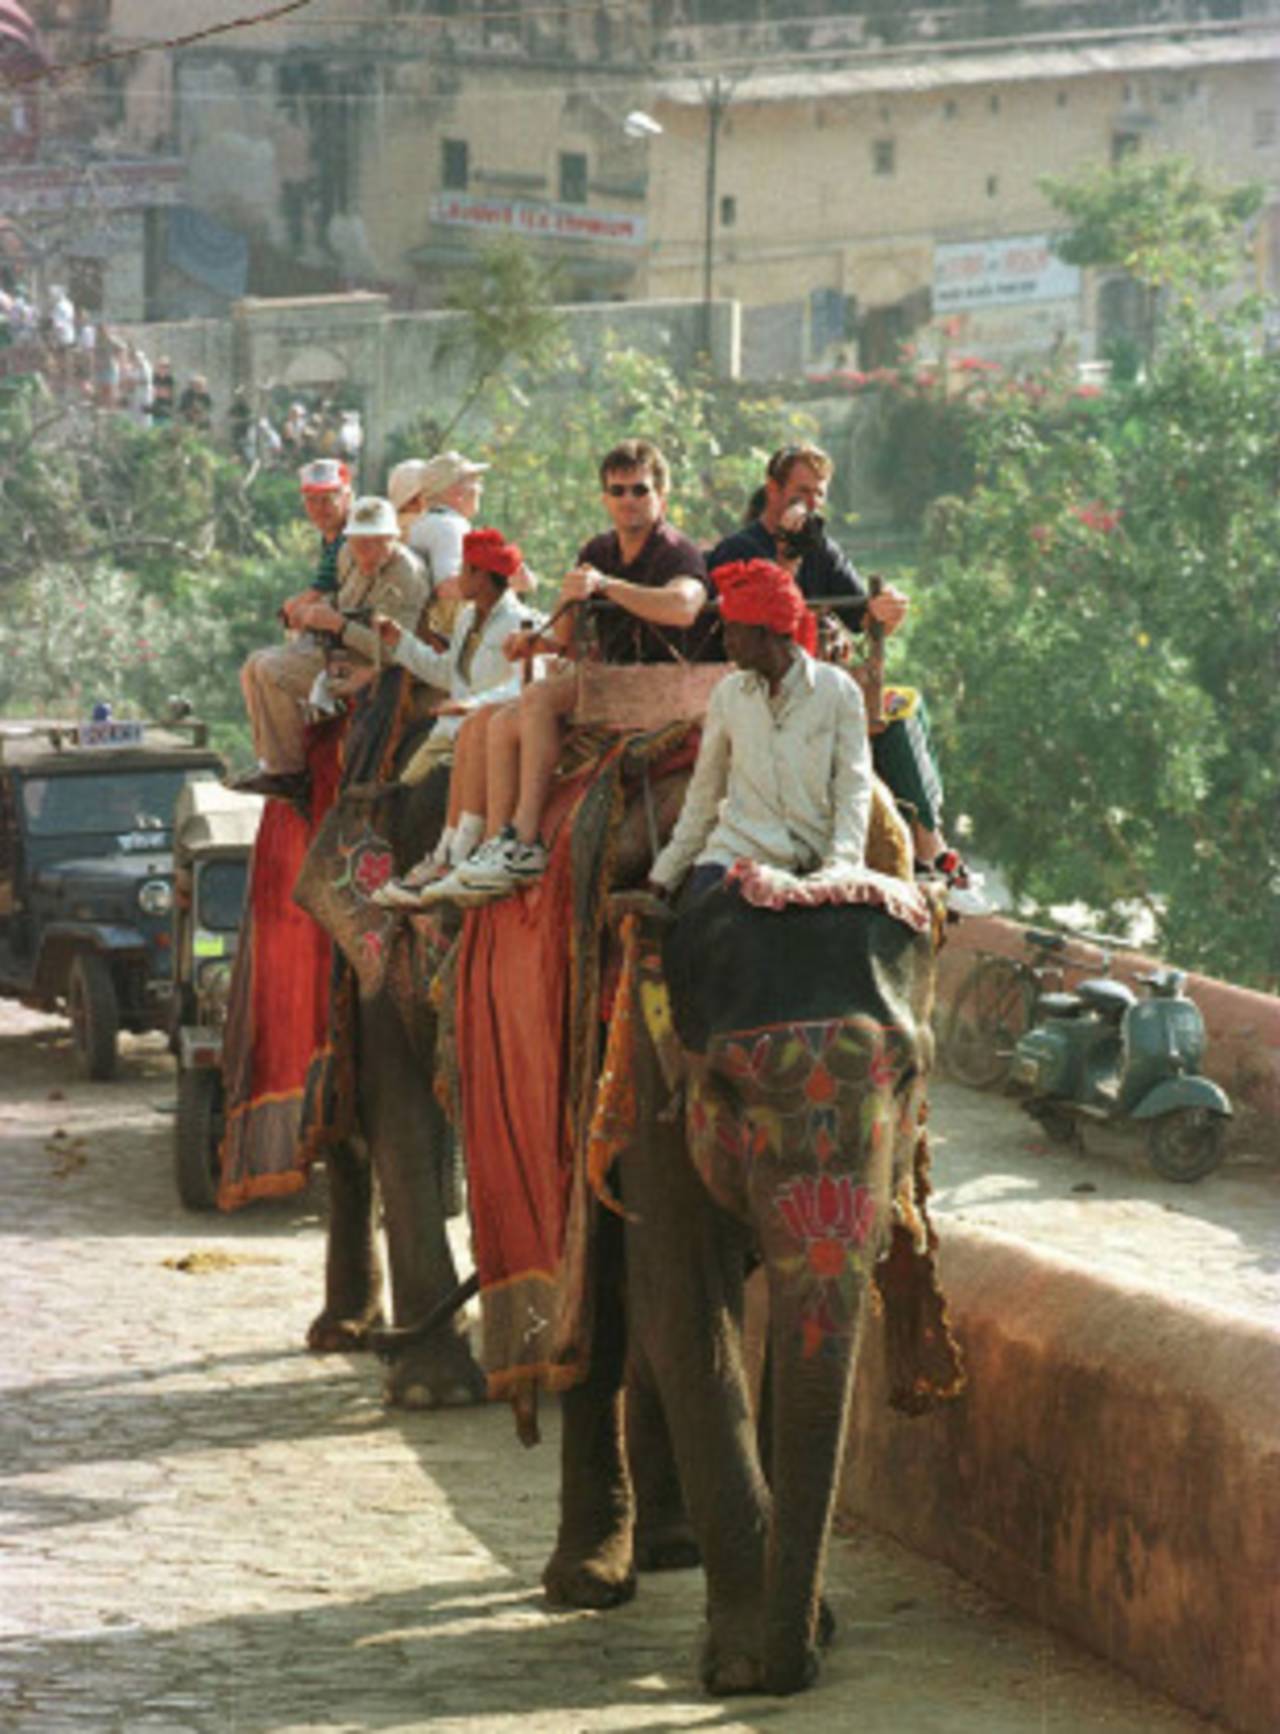 Steve Waugh and Paul Reiffel ride an elephant in the Amber Fort, Jaipur, March 6, 1996